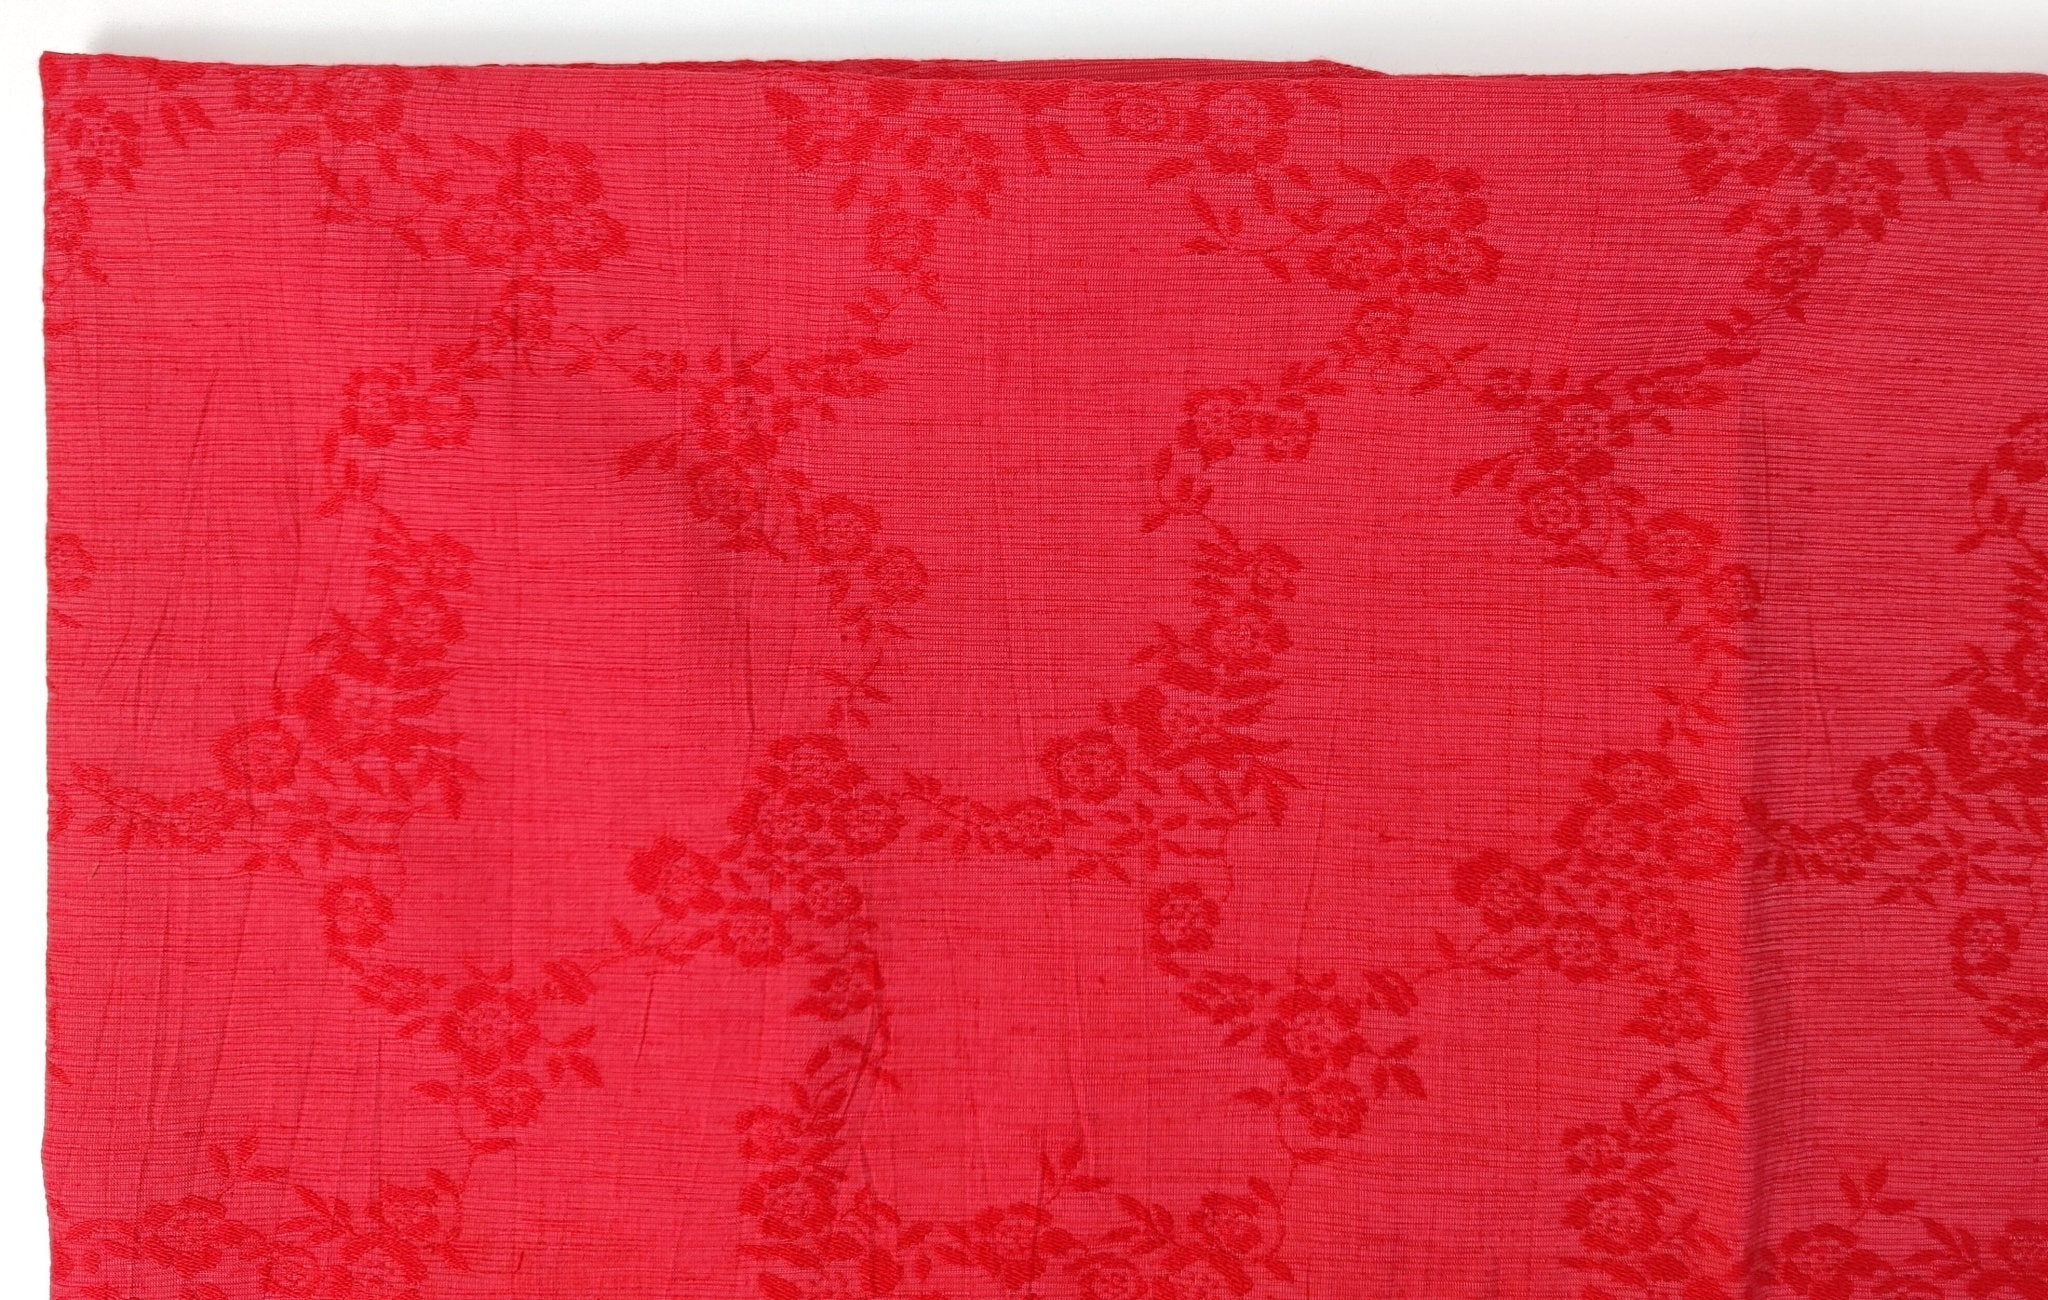 Linen Cotton Polyester Flower Jacquard Fabric with Crease Effect 6892 6893 6894 - The Linen Lab - Red